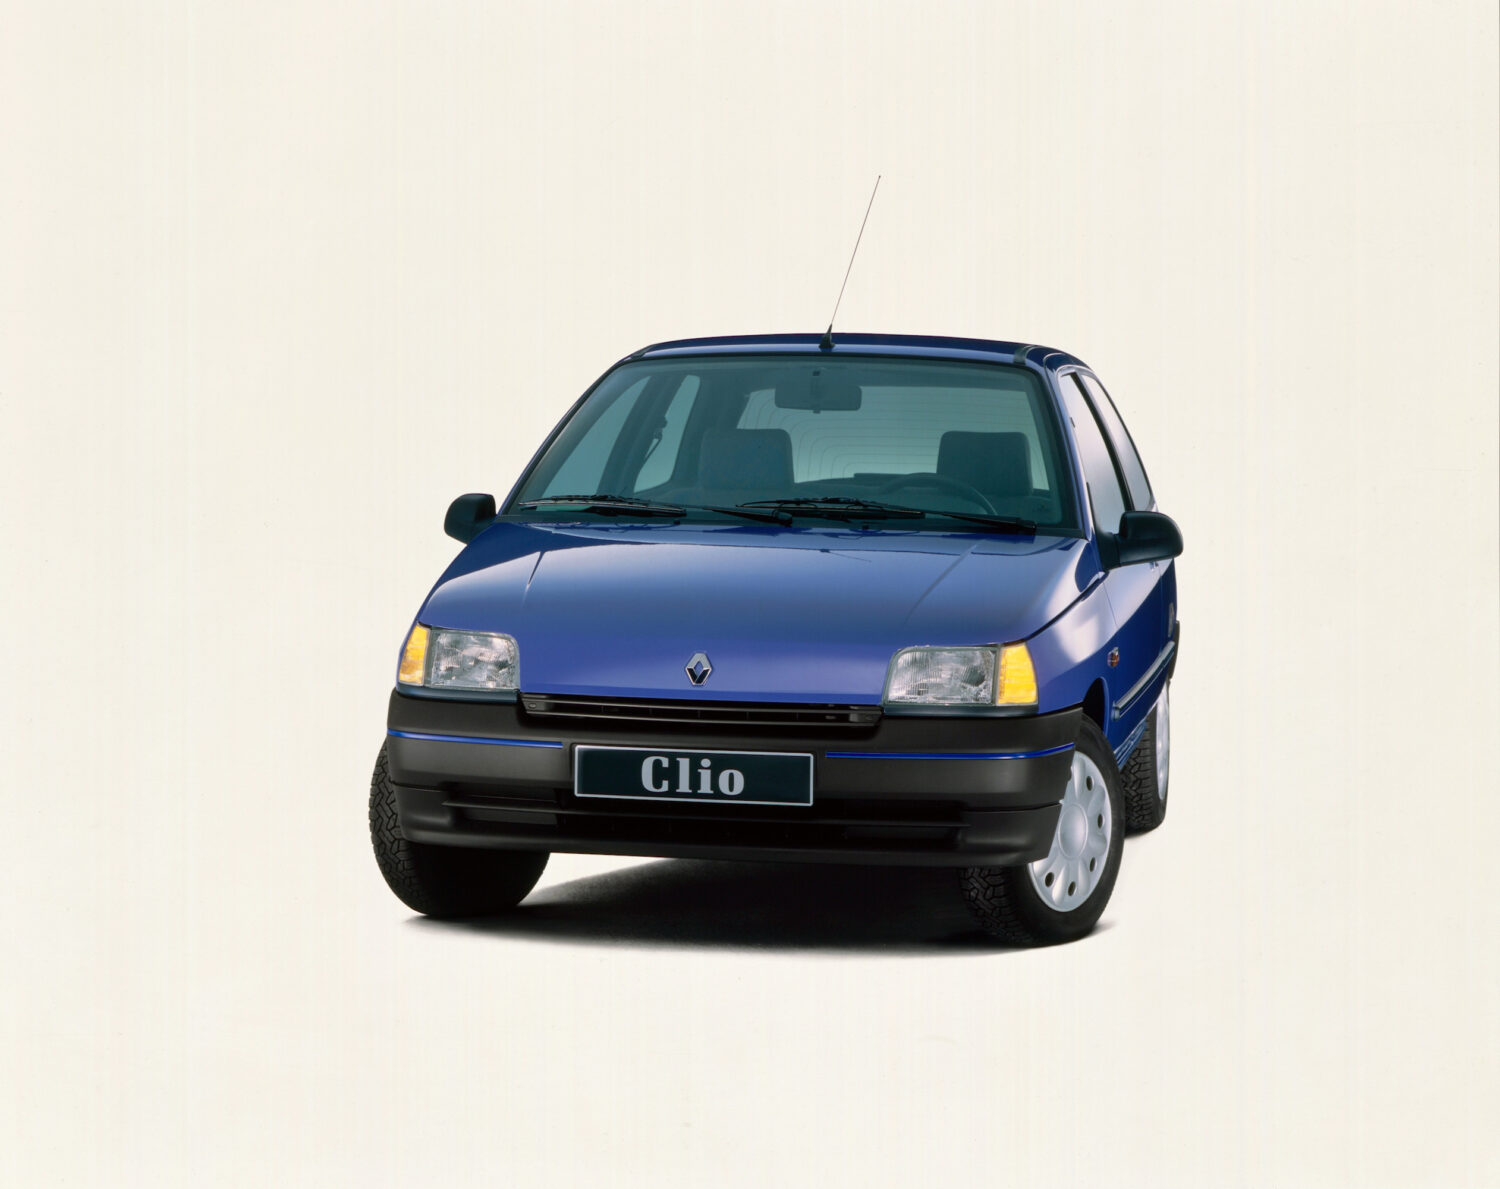 2020 - 30 years of Renault CLIO - Renault CLIO I (1990-1999)